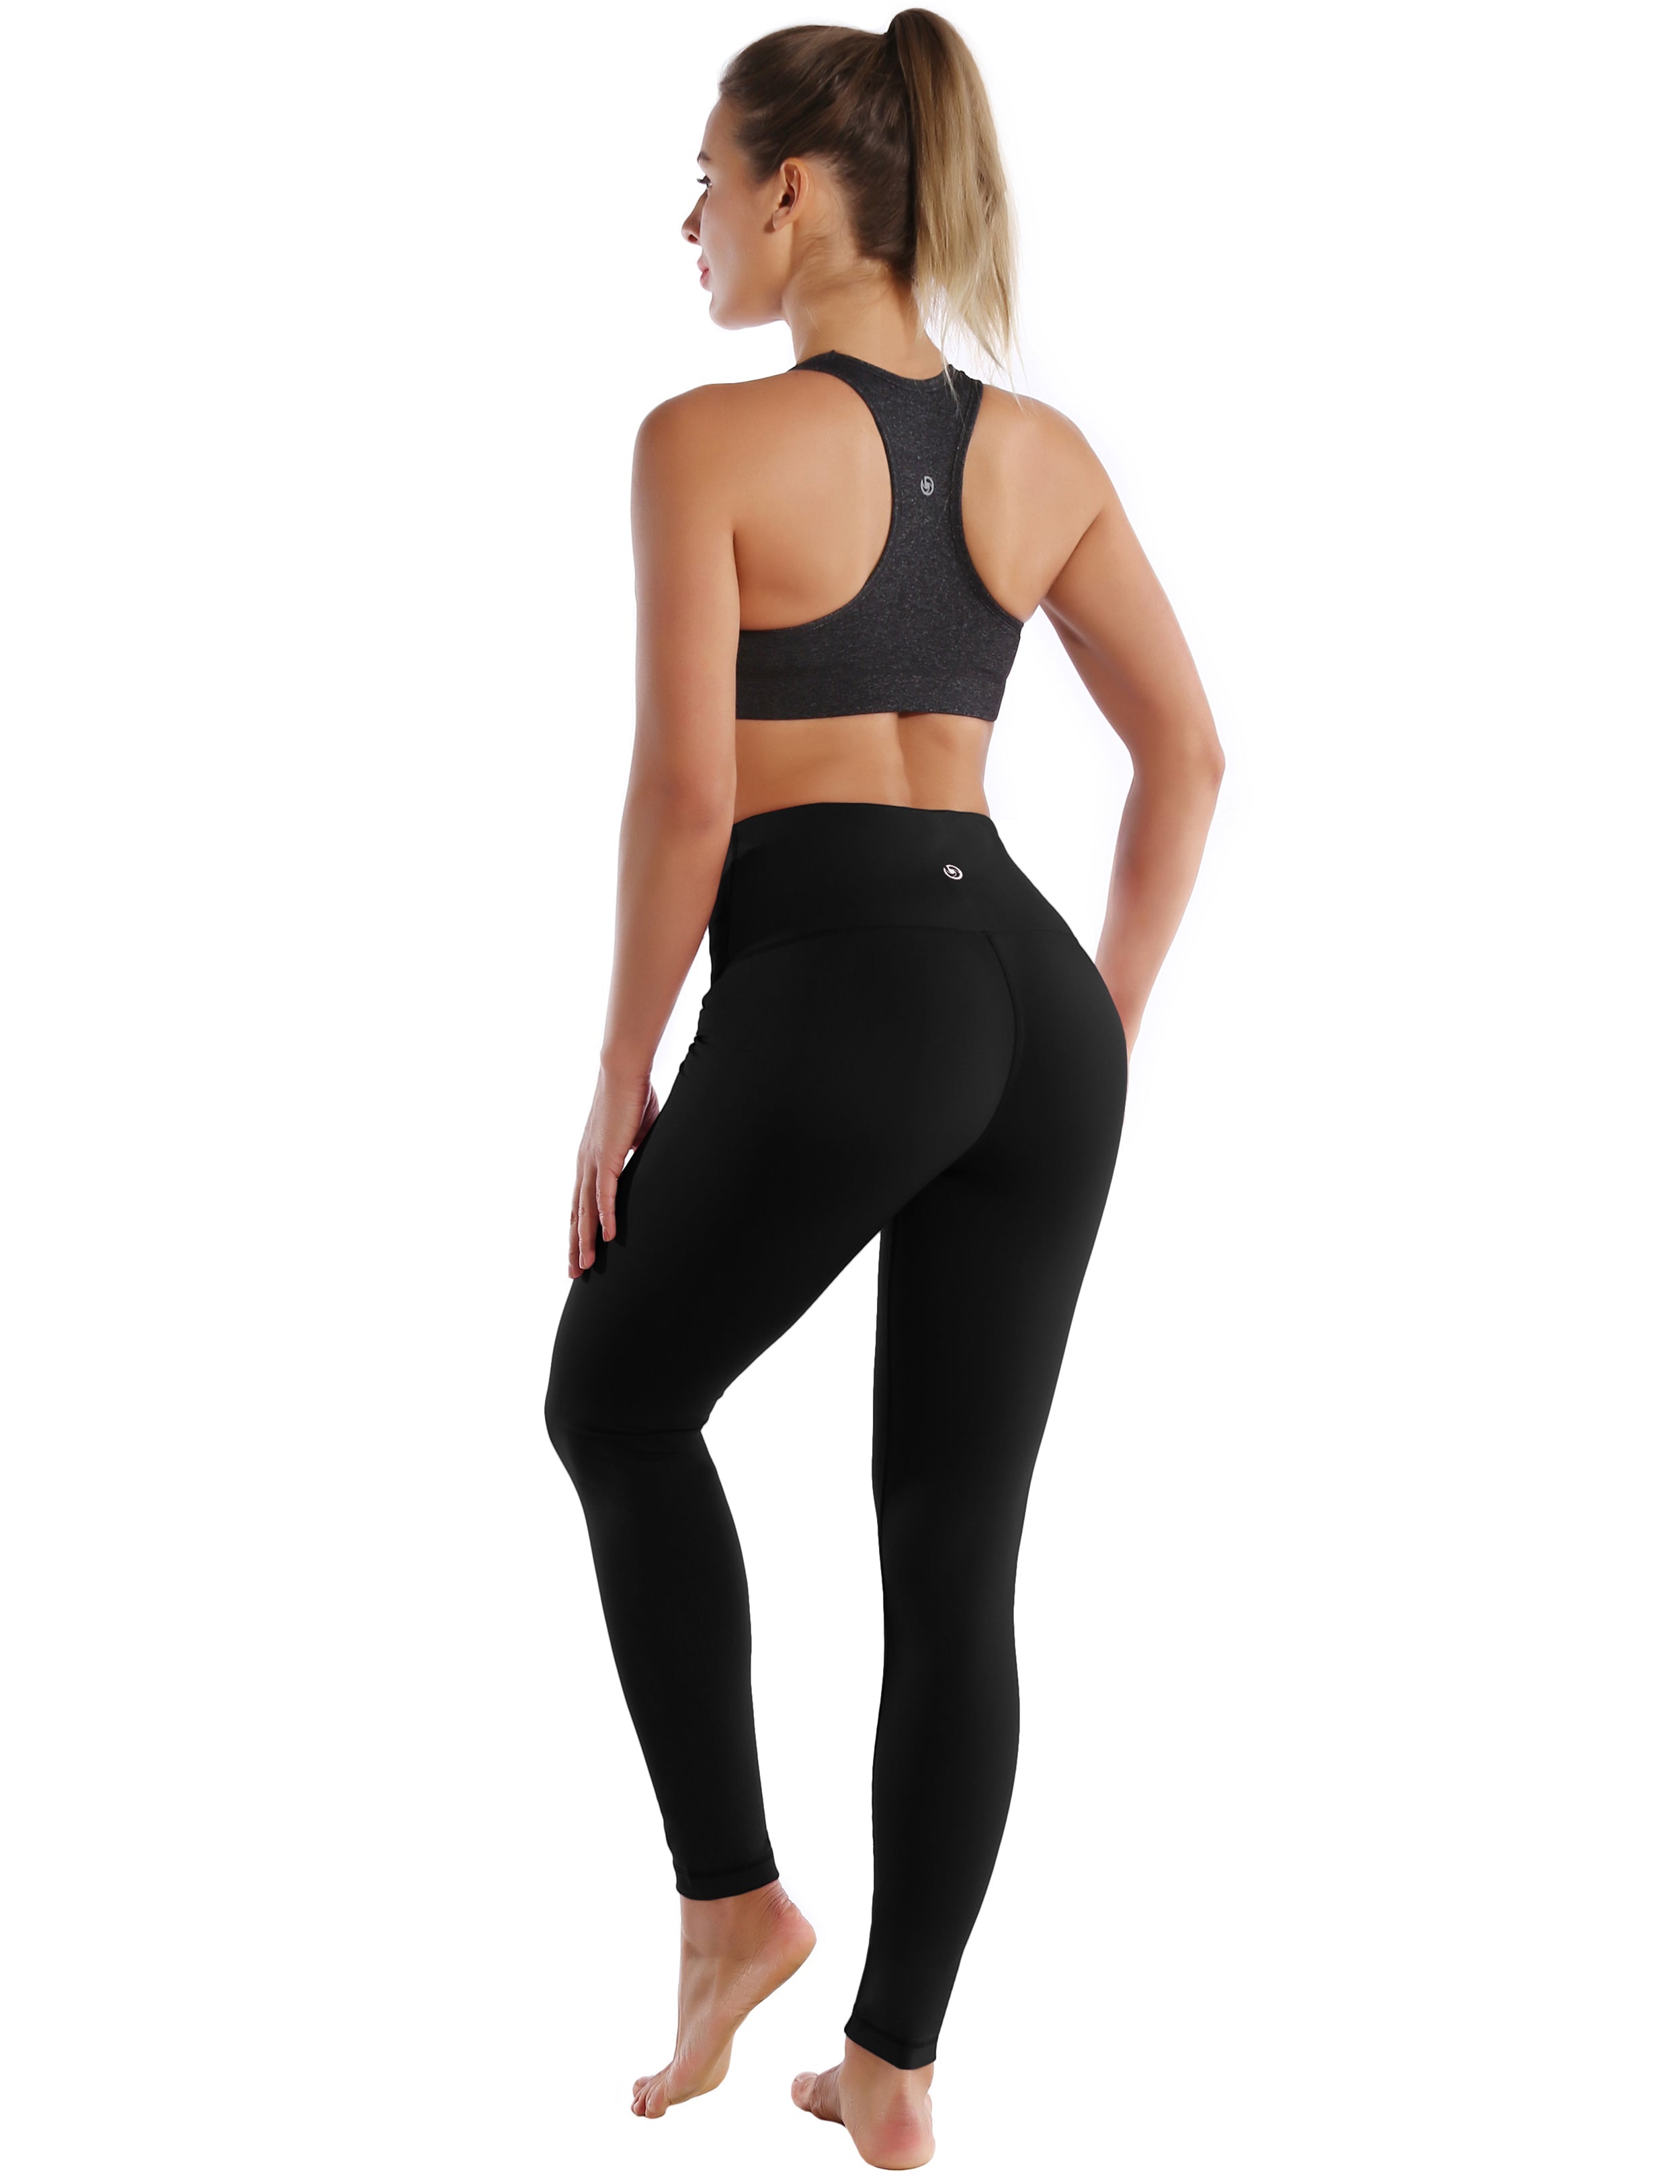 High Waist Pilates Pants black 75%Nylon/25%Spandex Fabric doesn't attract lint easily 4-way stretch No see-through Moisture-wicking Tummy control Inner pocket Four lengths